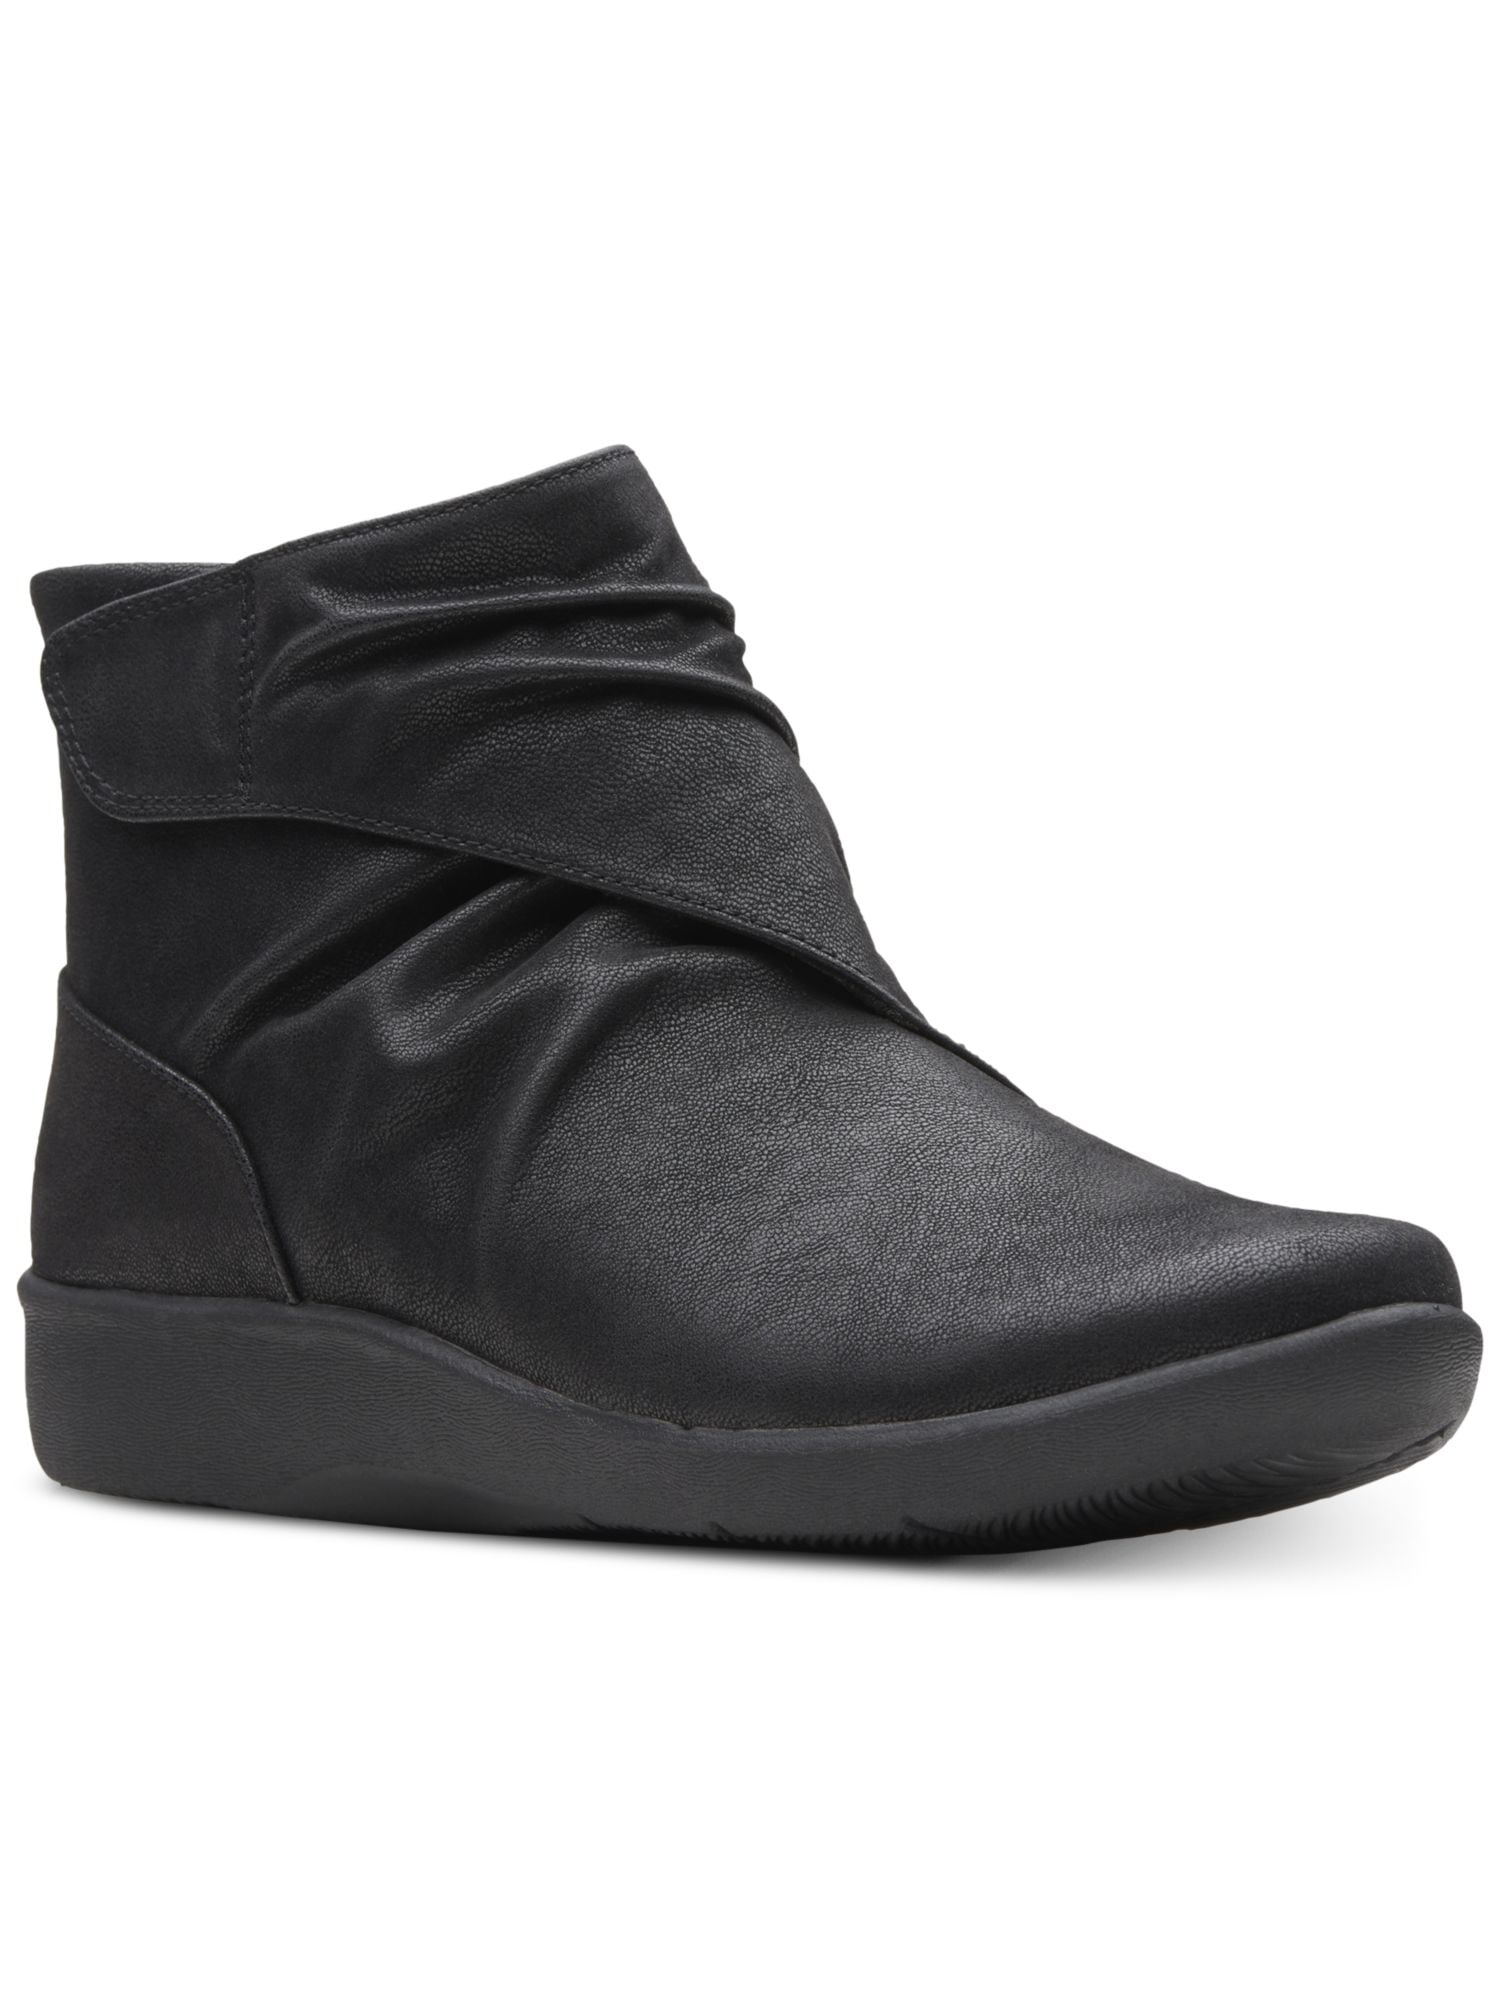 CLOUD STEPPERS BY CLARKS Womens Black Ortholite Footbed Dual Closure Cushioned Ruched Sillian Tana Wedge Zip-Up Boots - Walmart.com